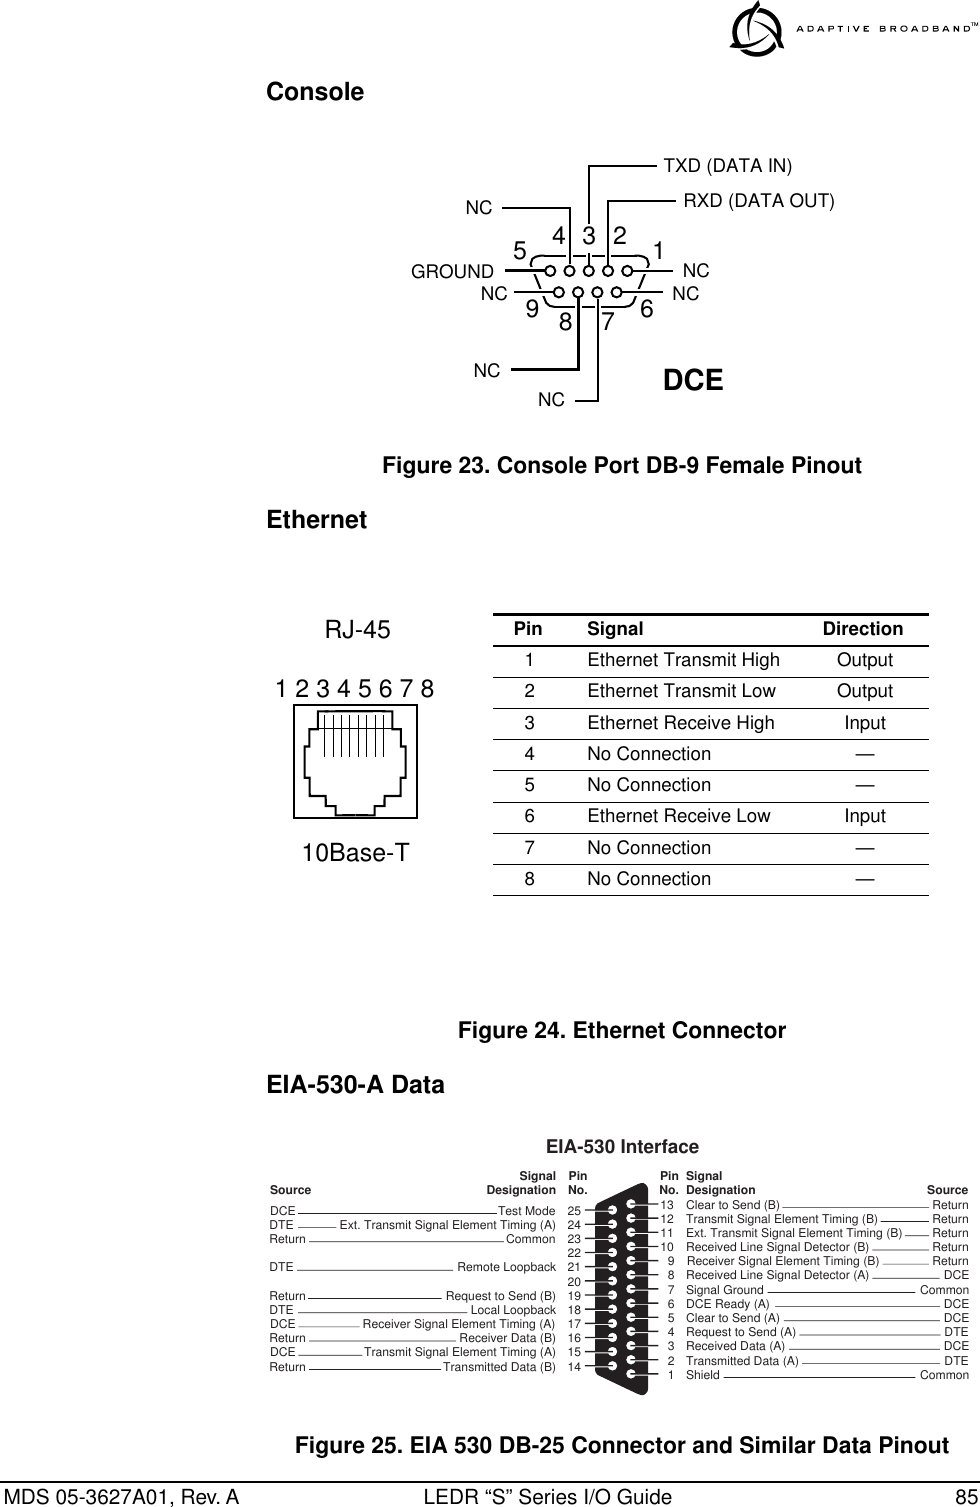 MDS 05-3627A01, Rev. A LEDR “S” Series I/O Guide 85ConsoleInvisible place holderFigure 23. Console Port DB-9 Female PinoutEthernetInvisible place holderFigure 24. Ethernet Connector EIA-530-A DataInvisible place holderFigure 25. EIA 530 DB-25 Connector and Similar Data Pinout678912345NCRXD (DATA OUT)TXD (DATA IN)NCNCNCNCNCGROUNDDCE1 2 3 4 5 6 7 8RJ-4510Base-TInvisible place holderPin Signal Direction1 Ethernet Transmit High Output2 Ethernet Transmit Low Output3 Ethernet Receive High Input4 No Connection —5 No Connection —6 Ethernet Receive Low Input7 No Connection —8 No Connection —Clear to Send (B)Transmit Signal Element Timing (B)Ext. Transmit Signal Element Timing (B)13121110987654321Received Line Signal Detector (B)Receiver Signal Element Timing (B)Received Line Signal Detector (A)Signal GroundDCE Ready (A)Clear to Send (A)Request to Send (A)Received Data (A)Transmitted Data (A)ShieldReturnReturnReturnReturnReturnDCECommonDCEDCEDTEDCEDTECommon252423222120191817161514Test ModeExt. Transmit Signal Element Timing (A)CommonRemote LoopbackRequest to Send (B)Local LoopbackReceiver Signal Element Timing (A)Receiver Data (B)Transmit Signal Element Timing (A)Transmitted Data (B)DCEDTEReturnDTEReturnDTEDCEReturnDCEReturnSource SignalDesignation PinNo. PinNo. SignalDesignation SourceEIA-530 Interface